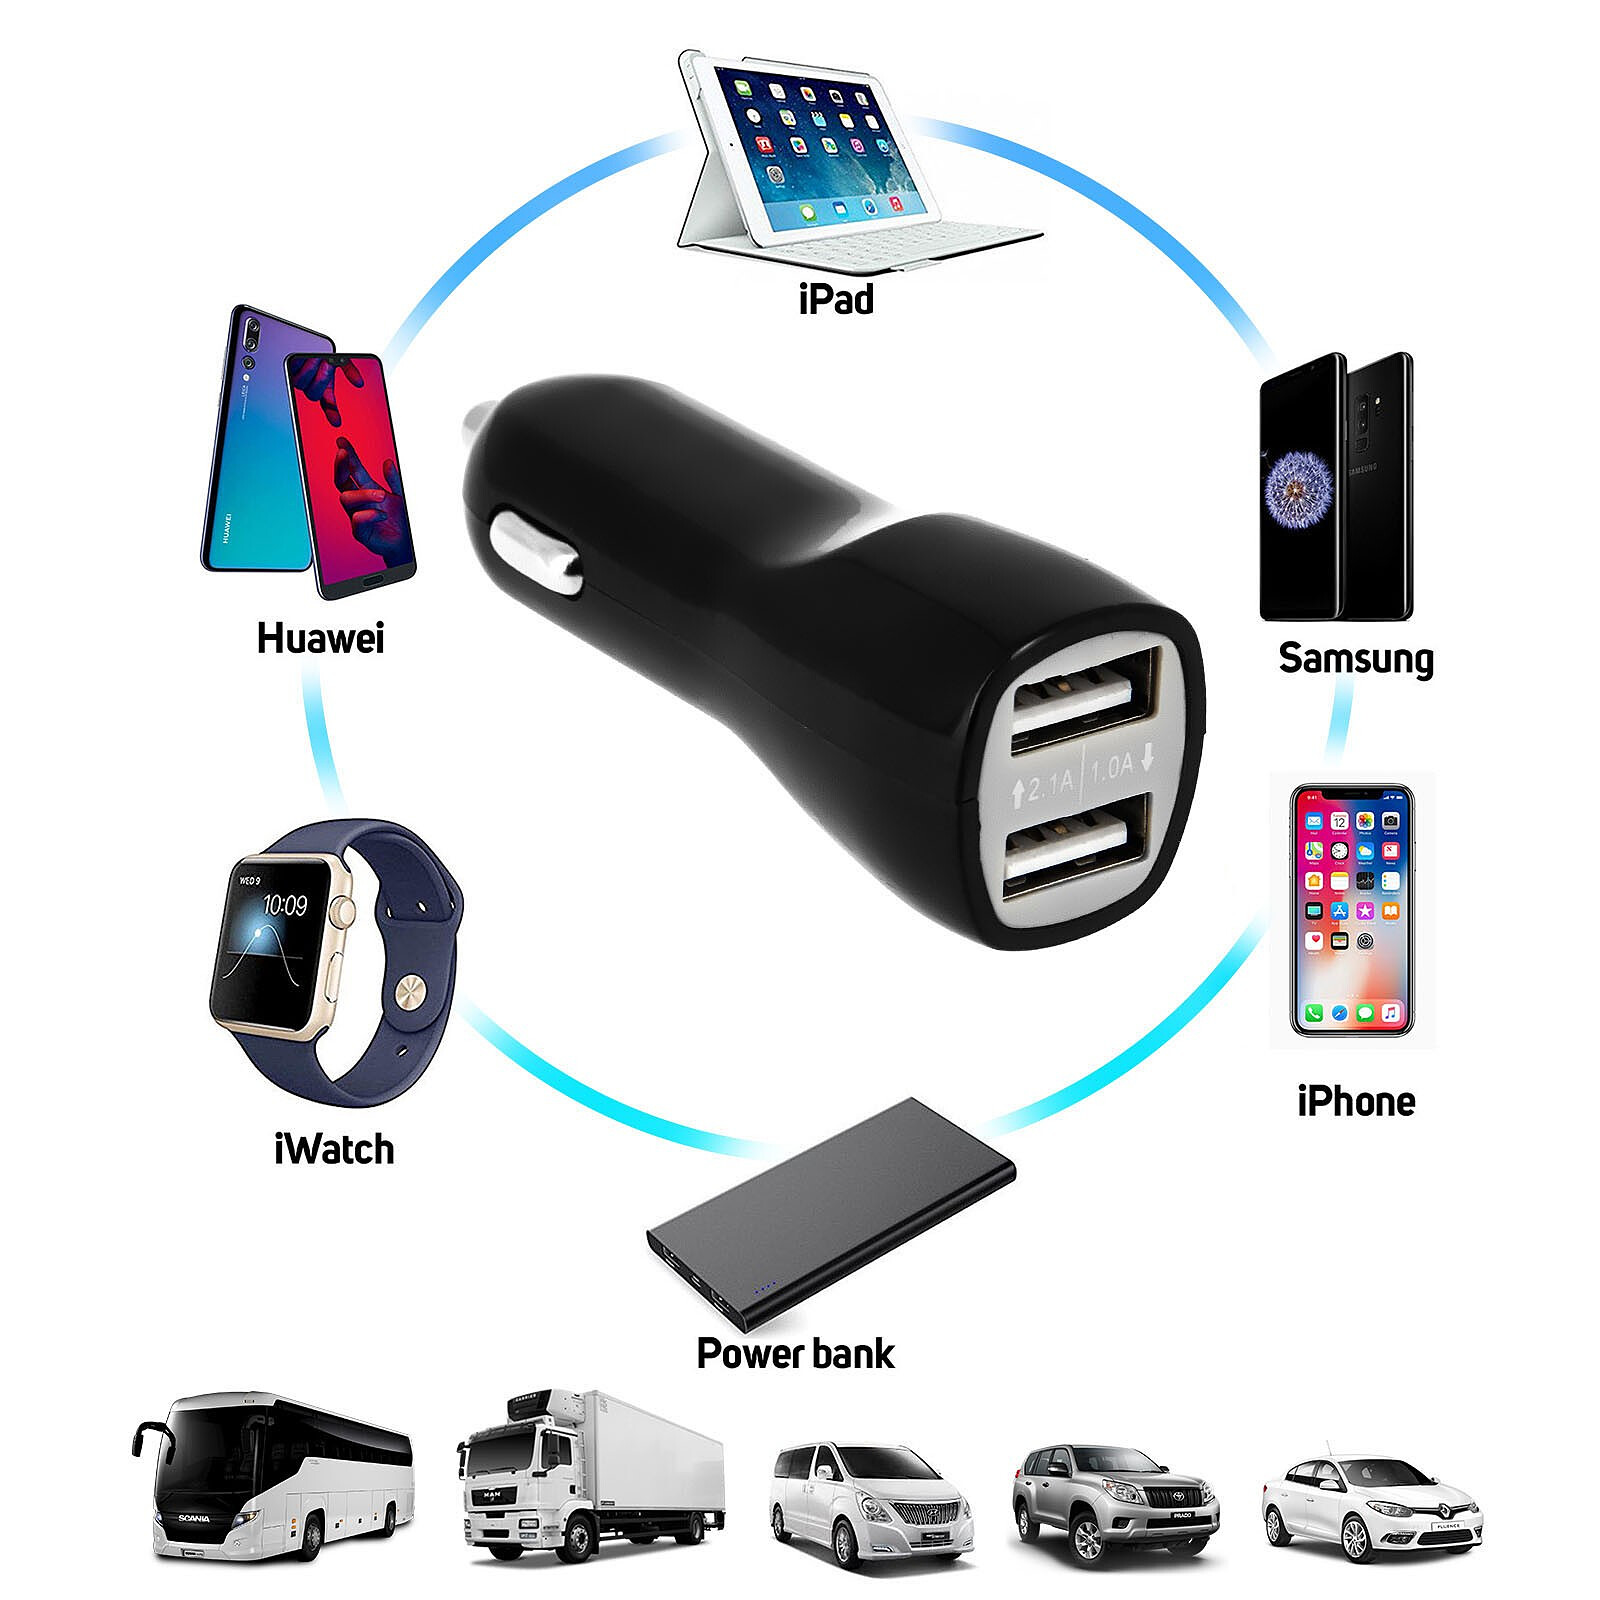 Avizar Chargeur Voiture Allume-cigare 2 port USB 2400mA avec LED  indicatrice de charge - Chargeur allume-cigare - LDLC